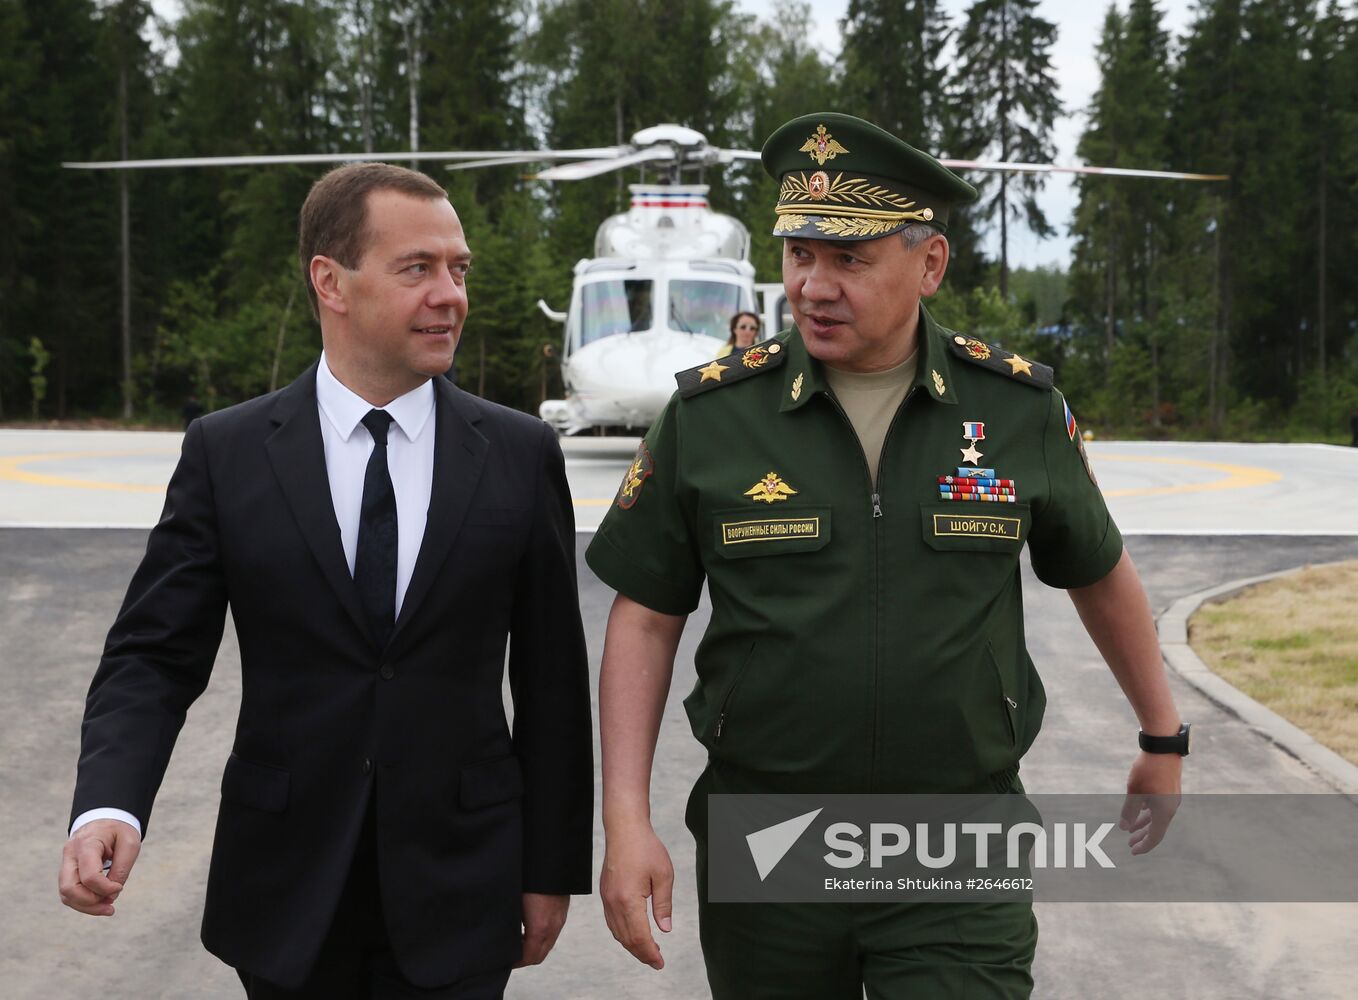 Prime Minister Medvedev visits ARMY 2015 International Military Technical Forum